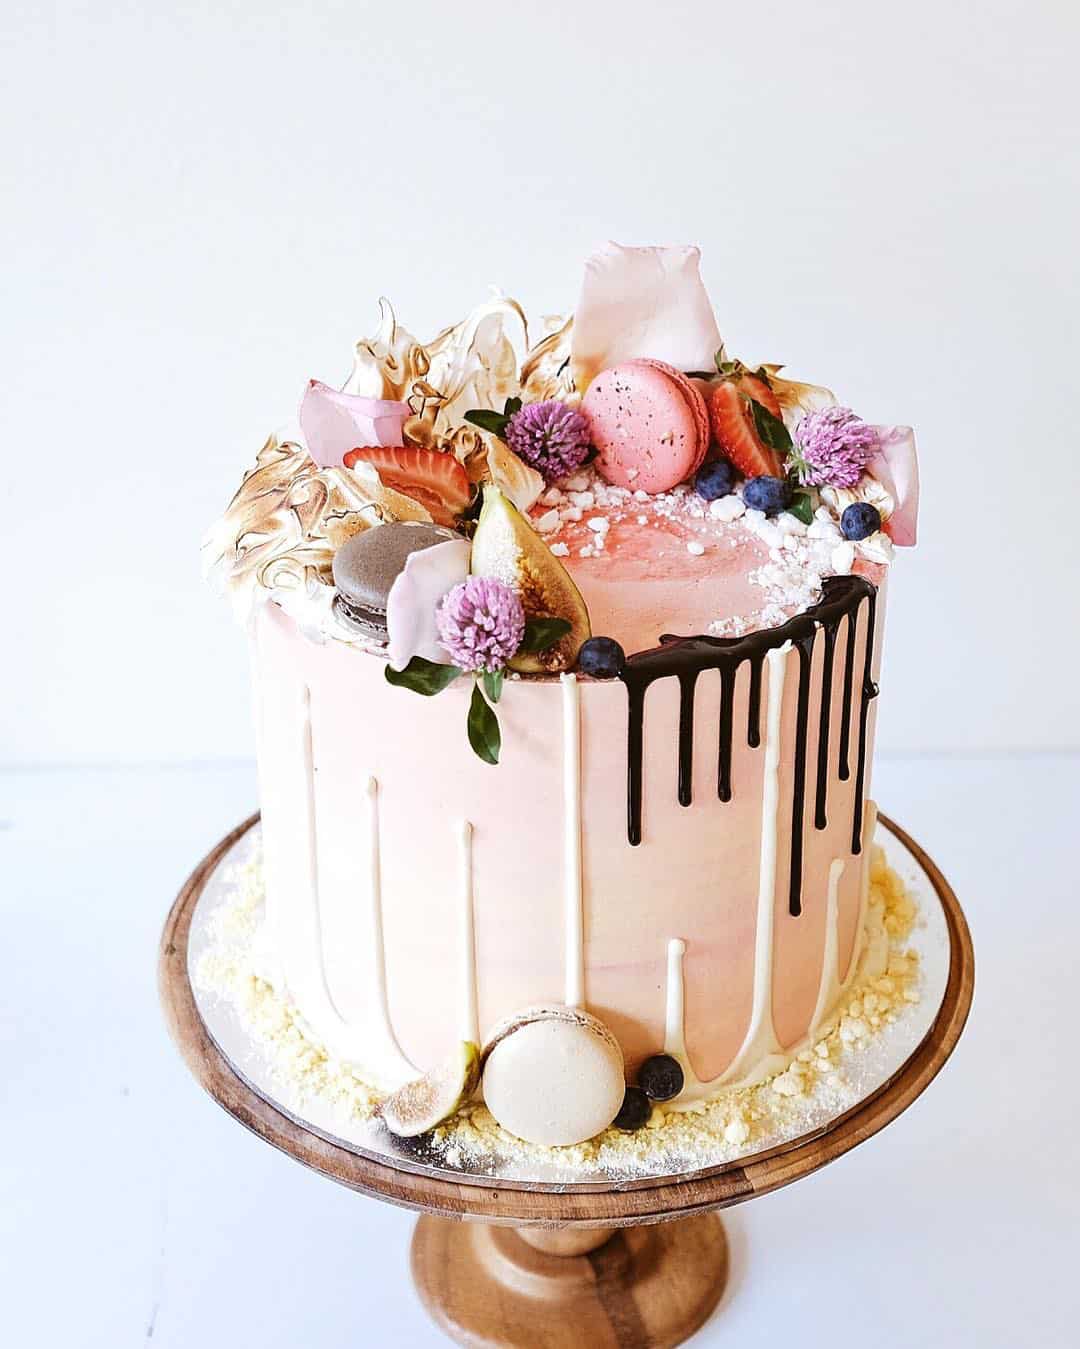 strawberry white chocolate drip cake by Sydney baker Cakes by Cliff